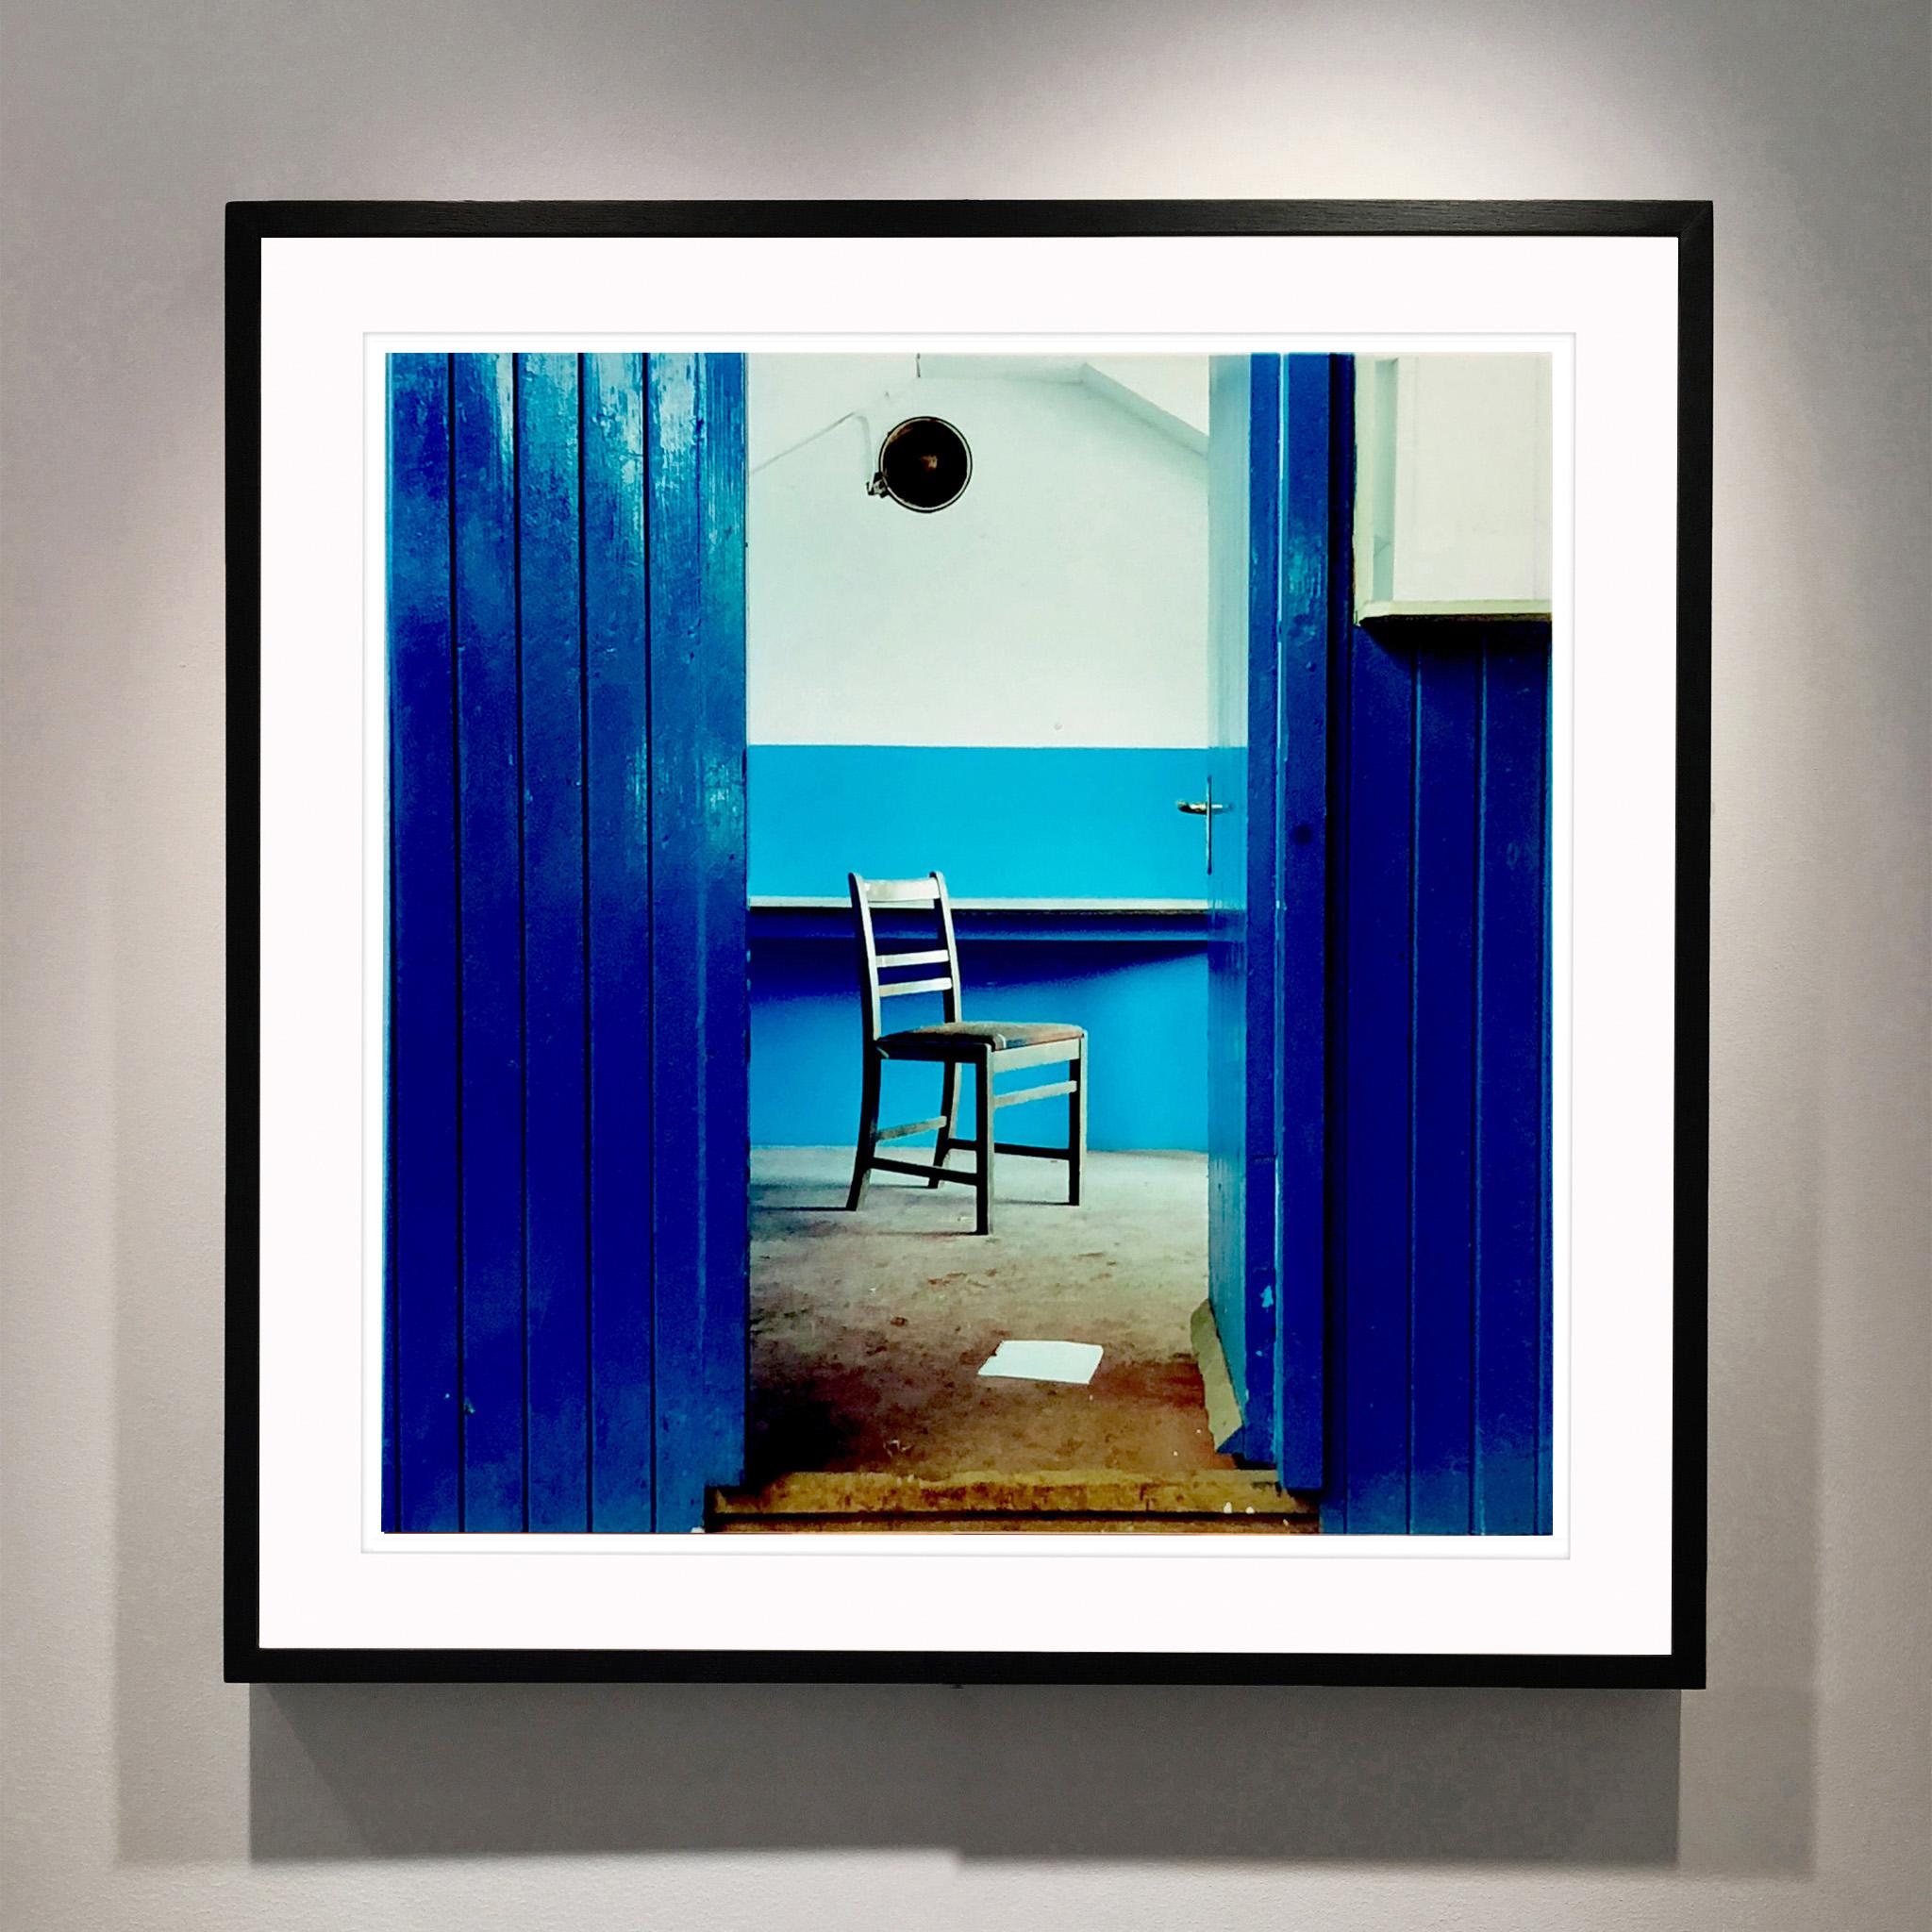 Chair, Northwich - Blue industrial interior photography - Photograph by Richard Heeps